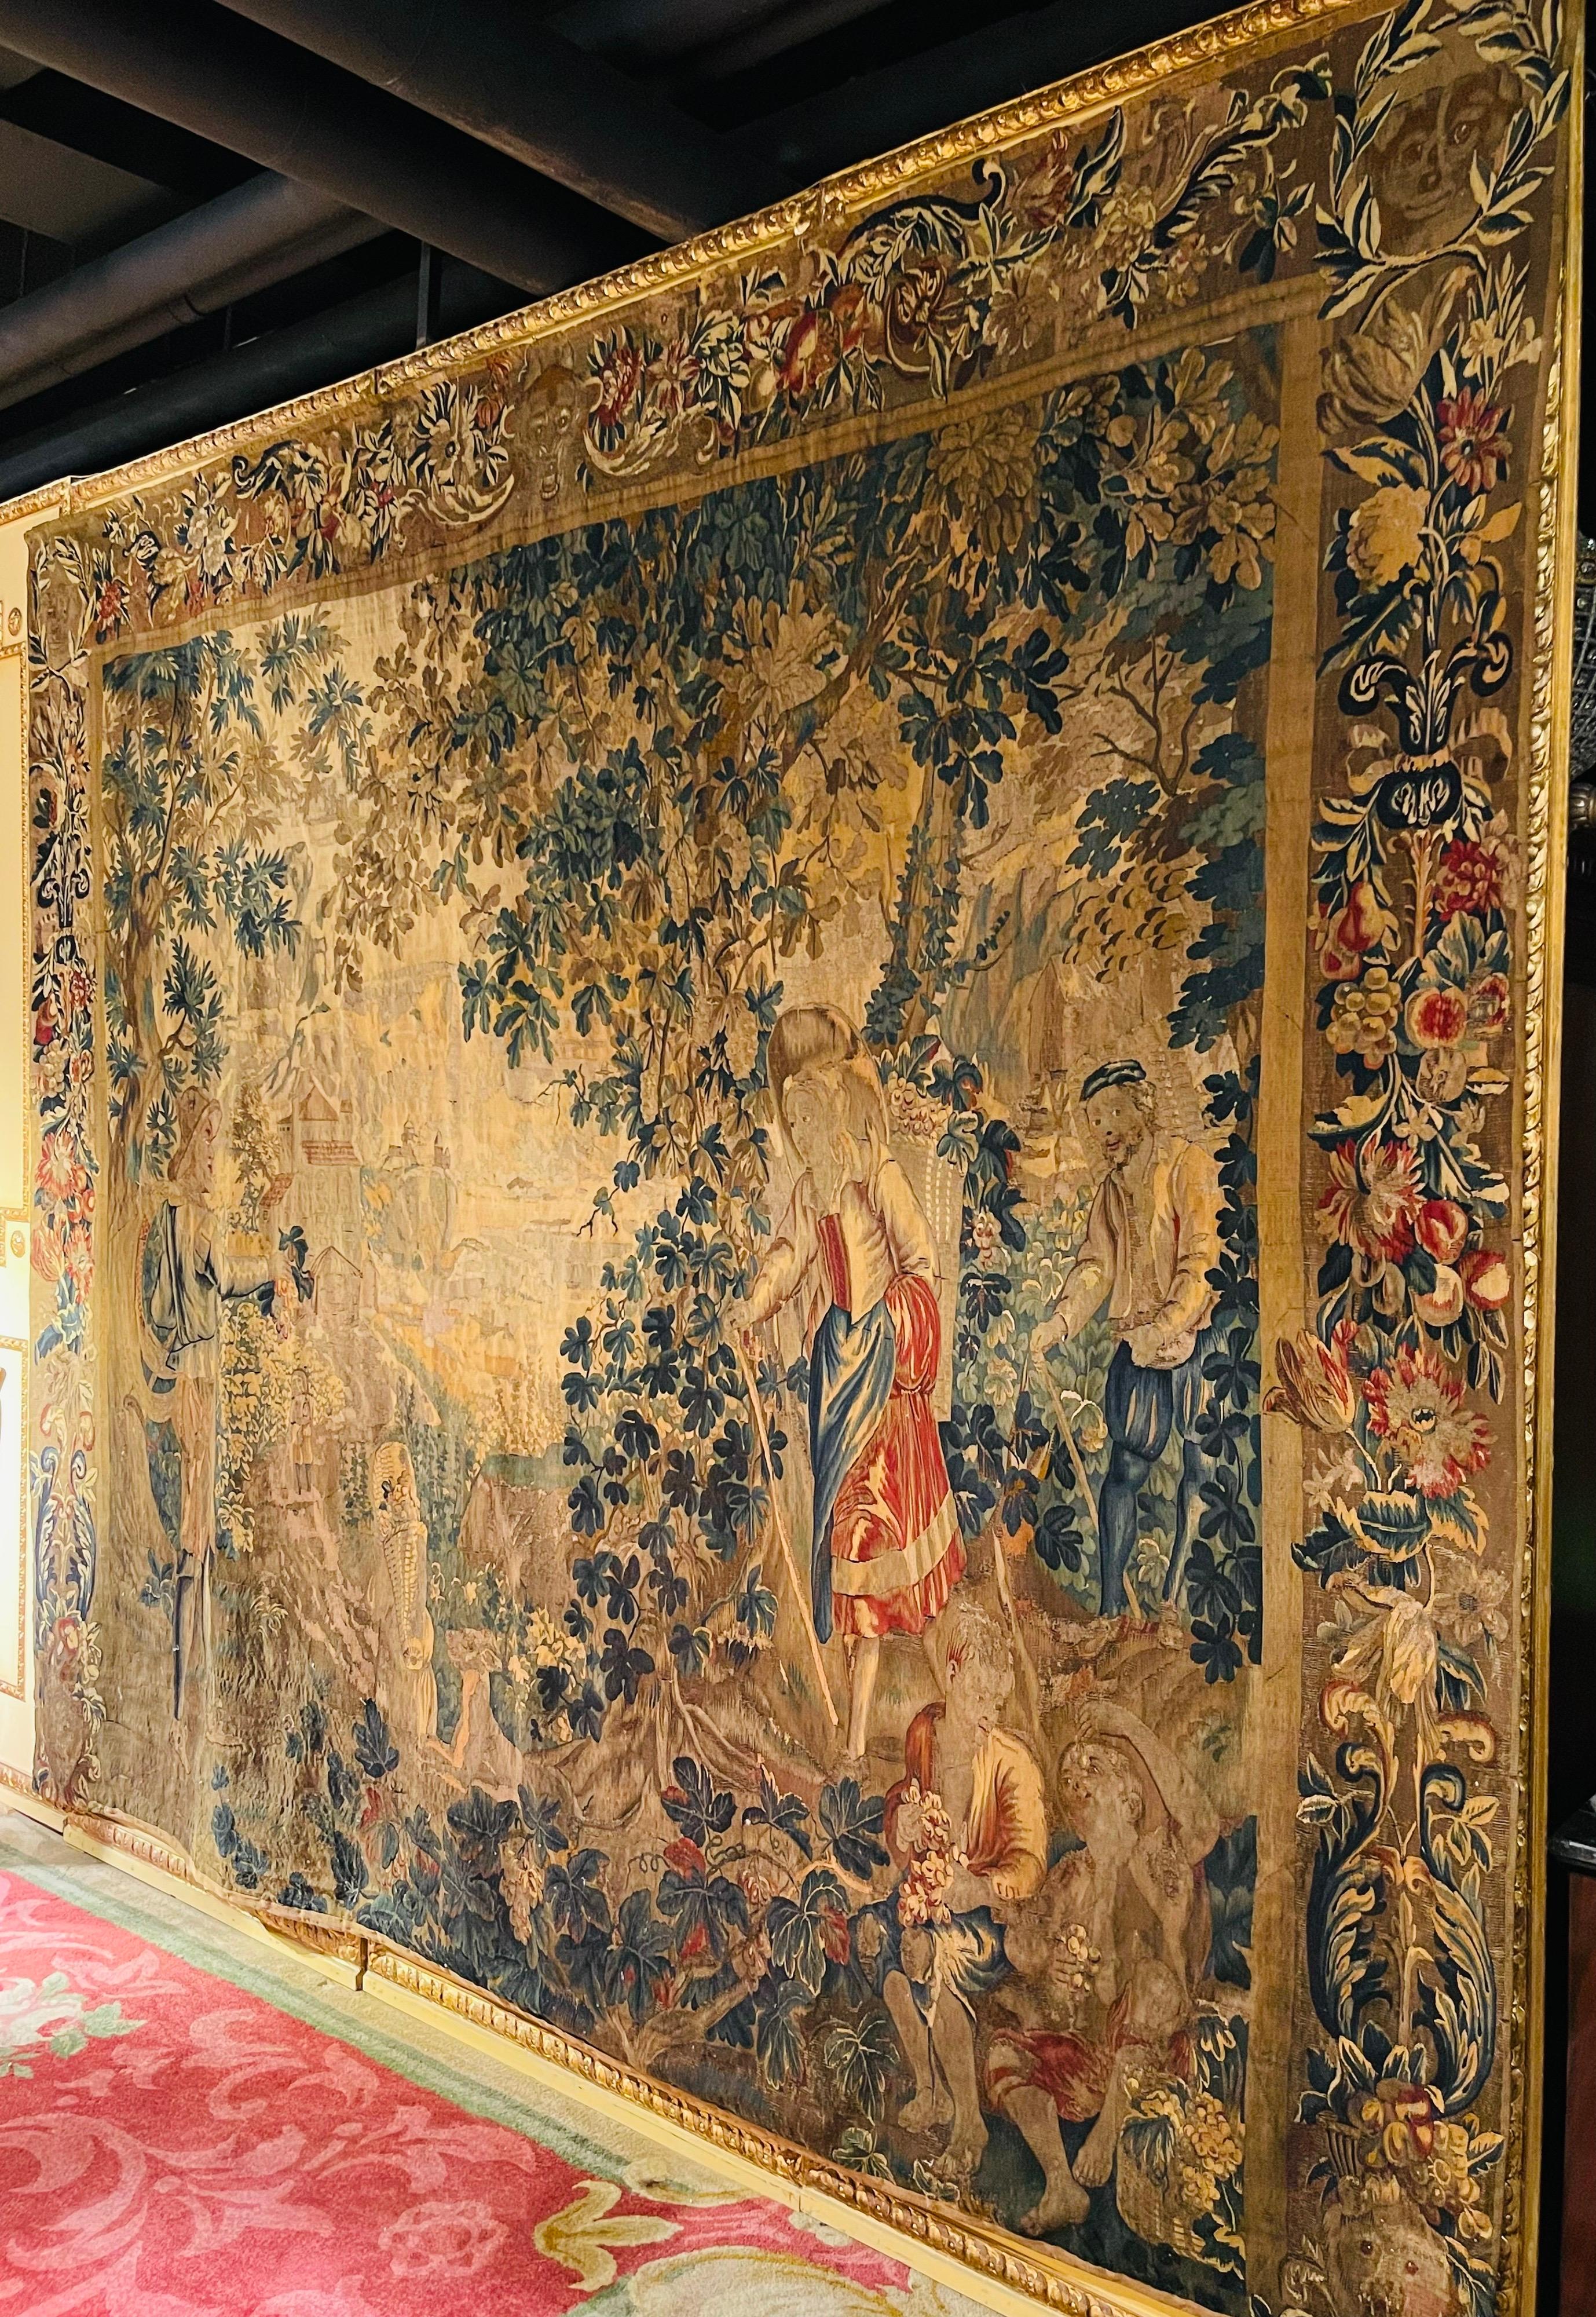 Hand-Woven Museum Gobelein / Tapestry 18th Century, Brussels